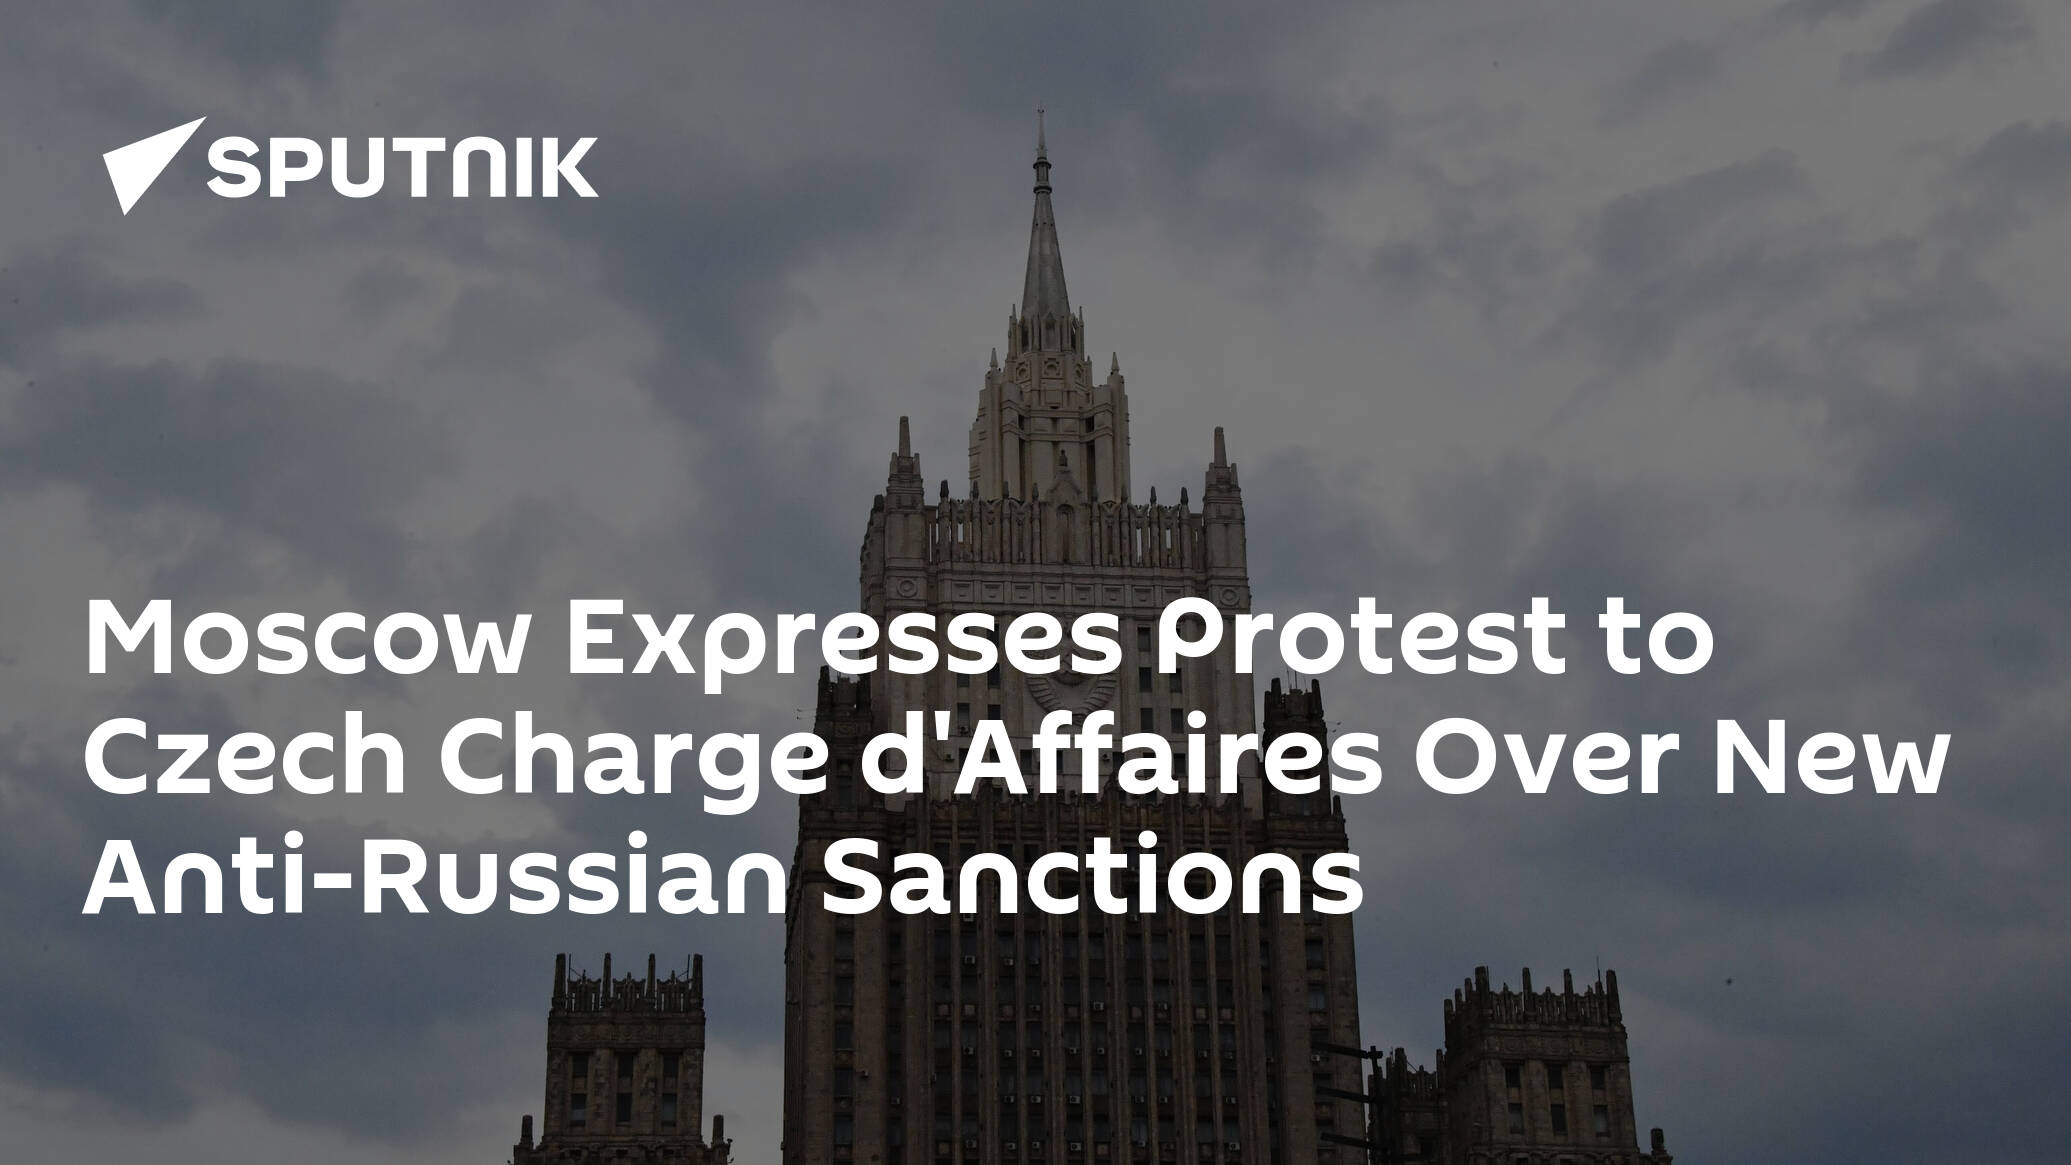 Moscow Expresses Protest to Czech Charge d'Affaires Over New Anti-Russian Sanctions